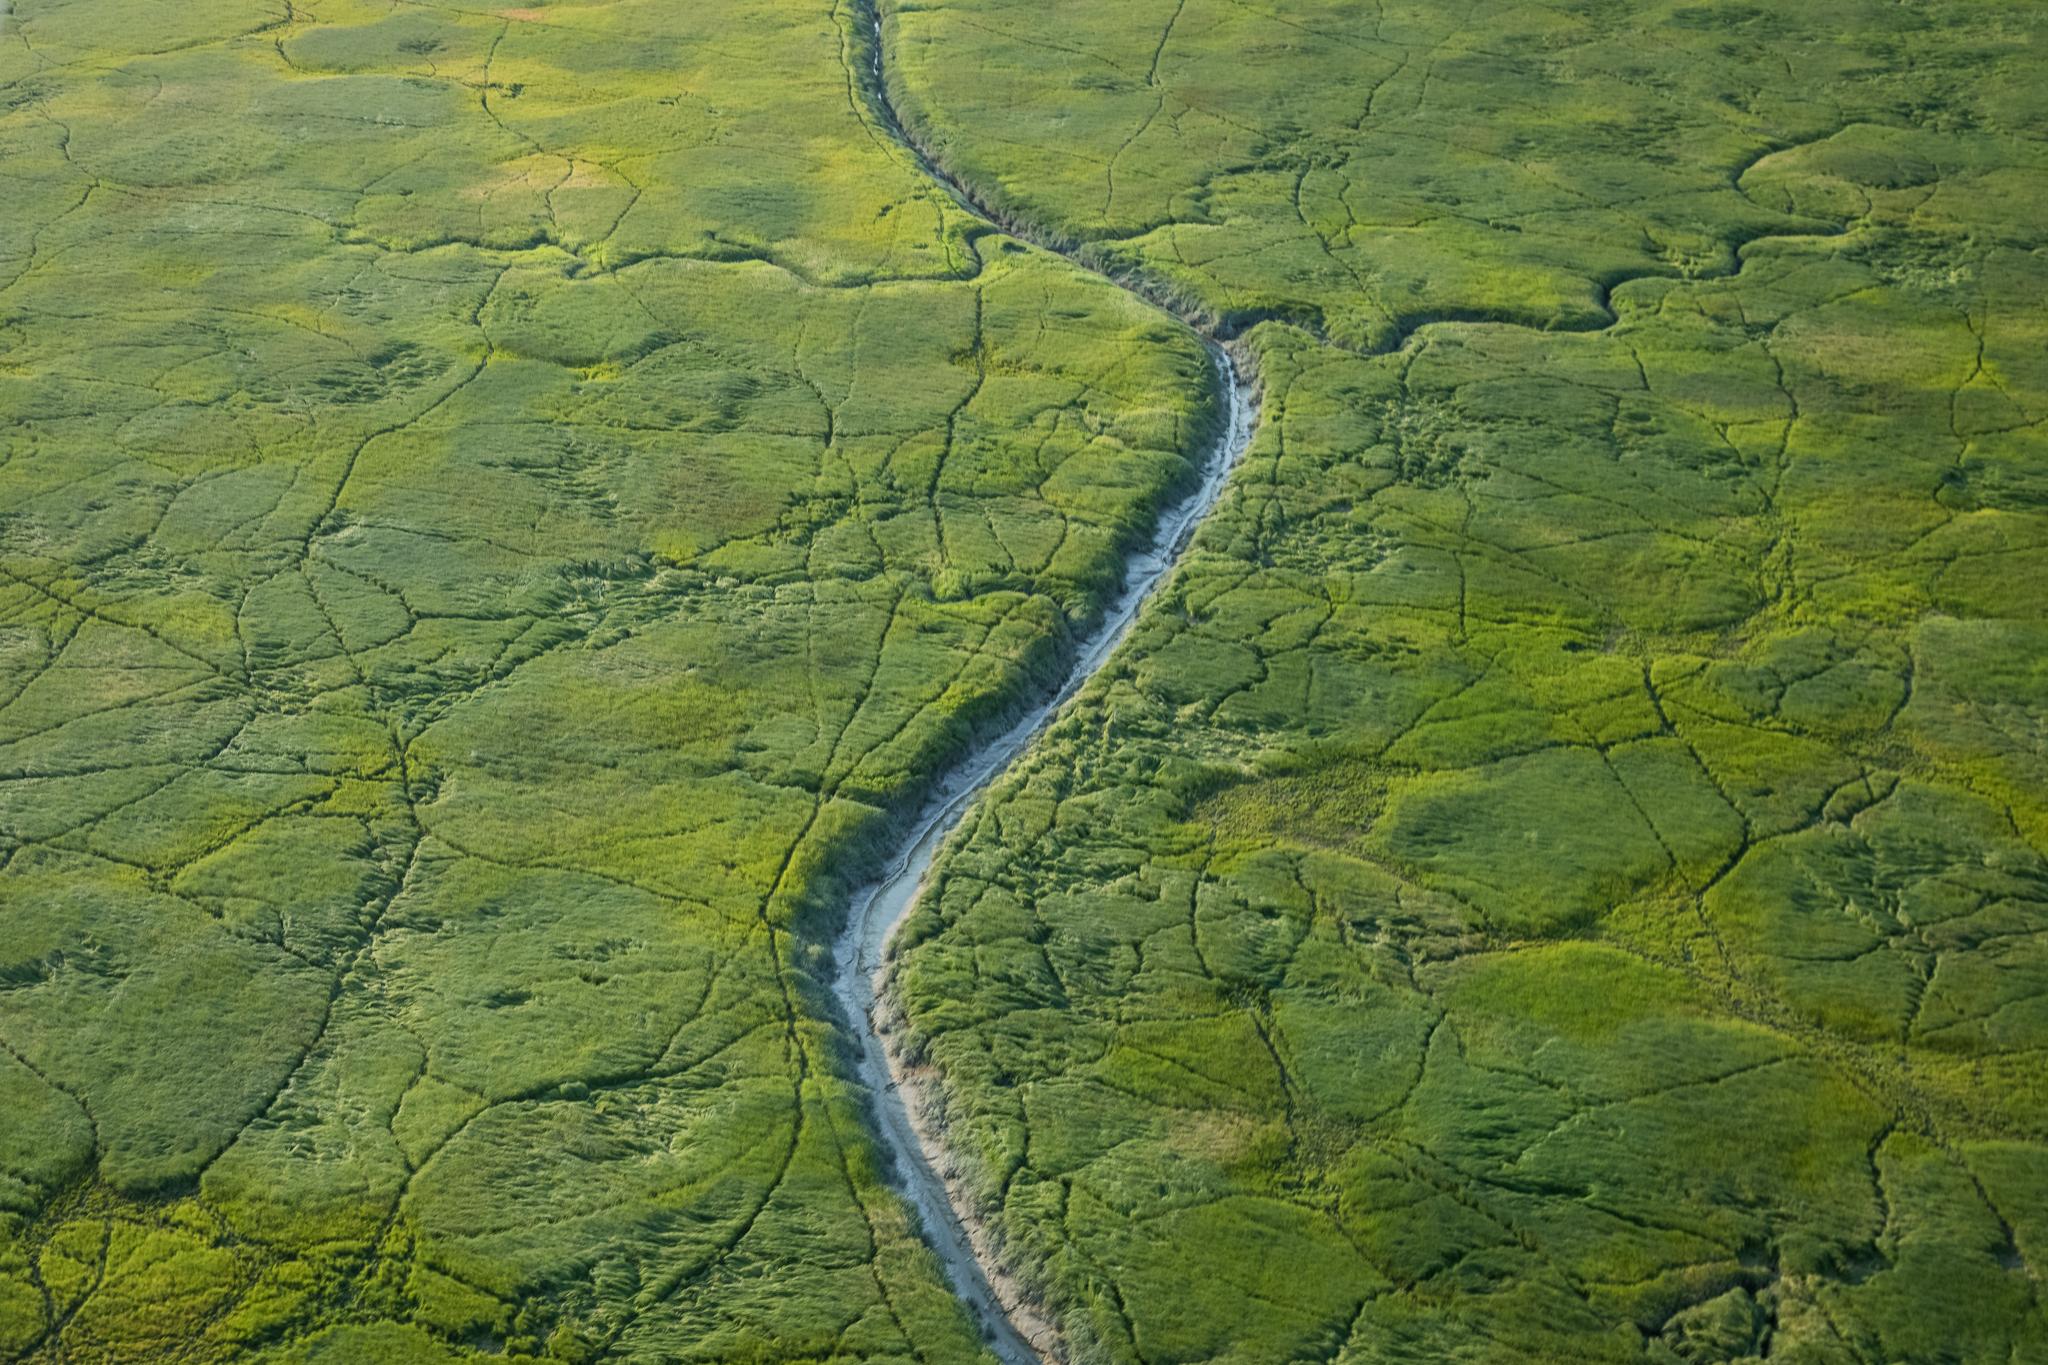 Brown bear trails create mazes through the sedge grass of Chinitna Bay. Sedges, which can have as much as 18 percent protein, are nutritious for bears. This spot is popular with tourists for day trips by bush plane.